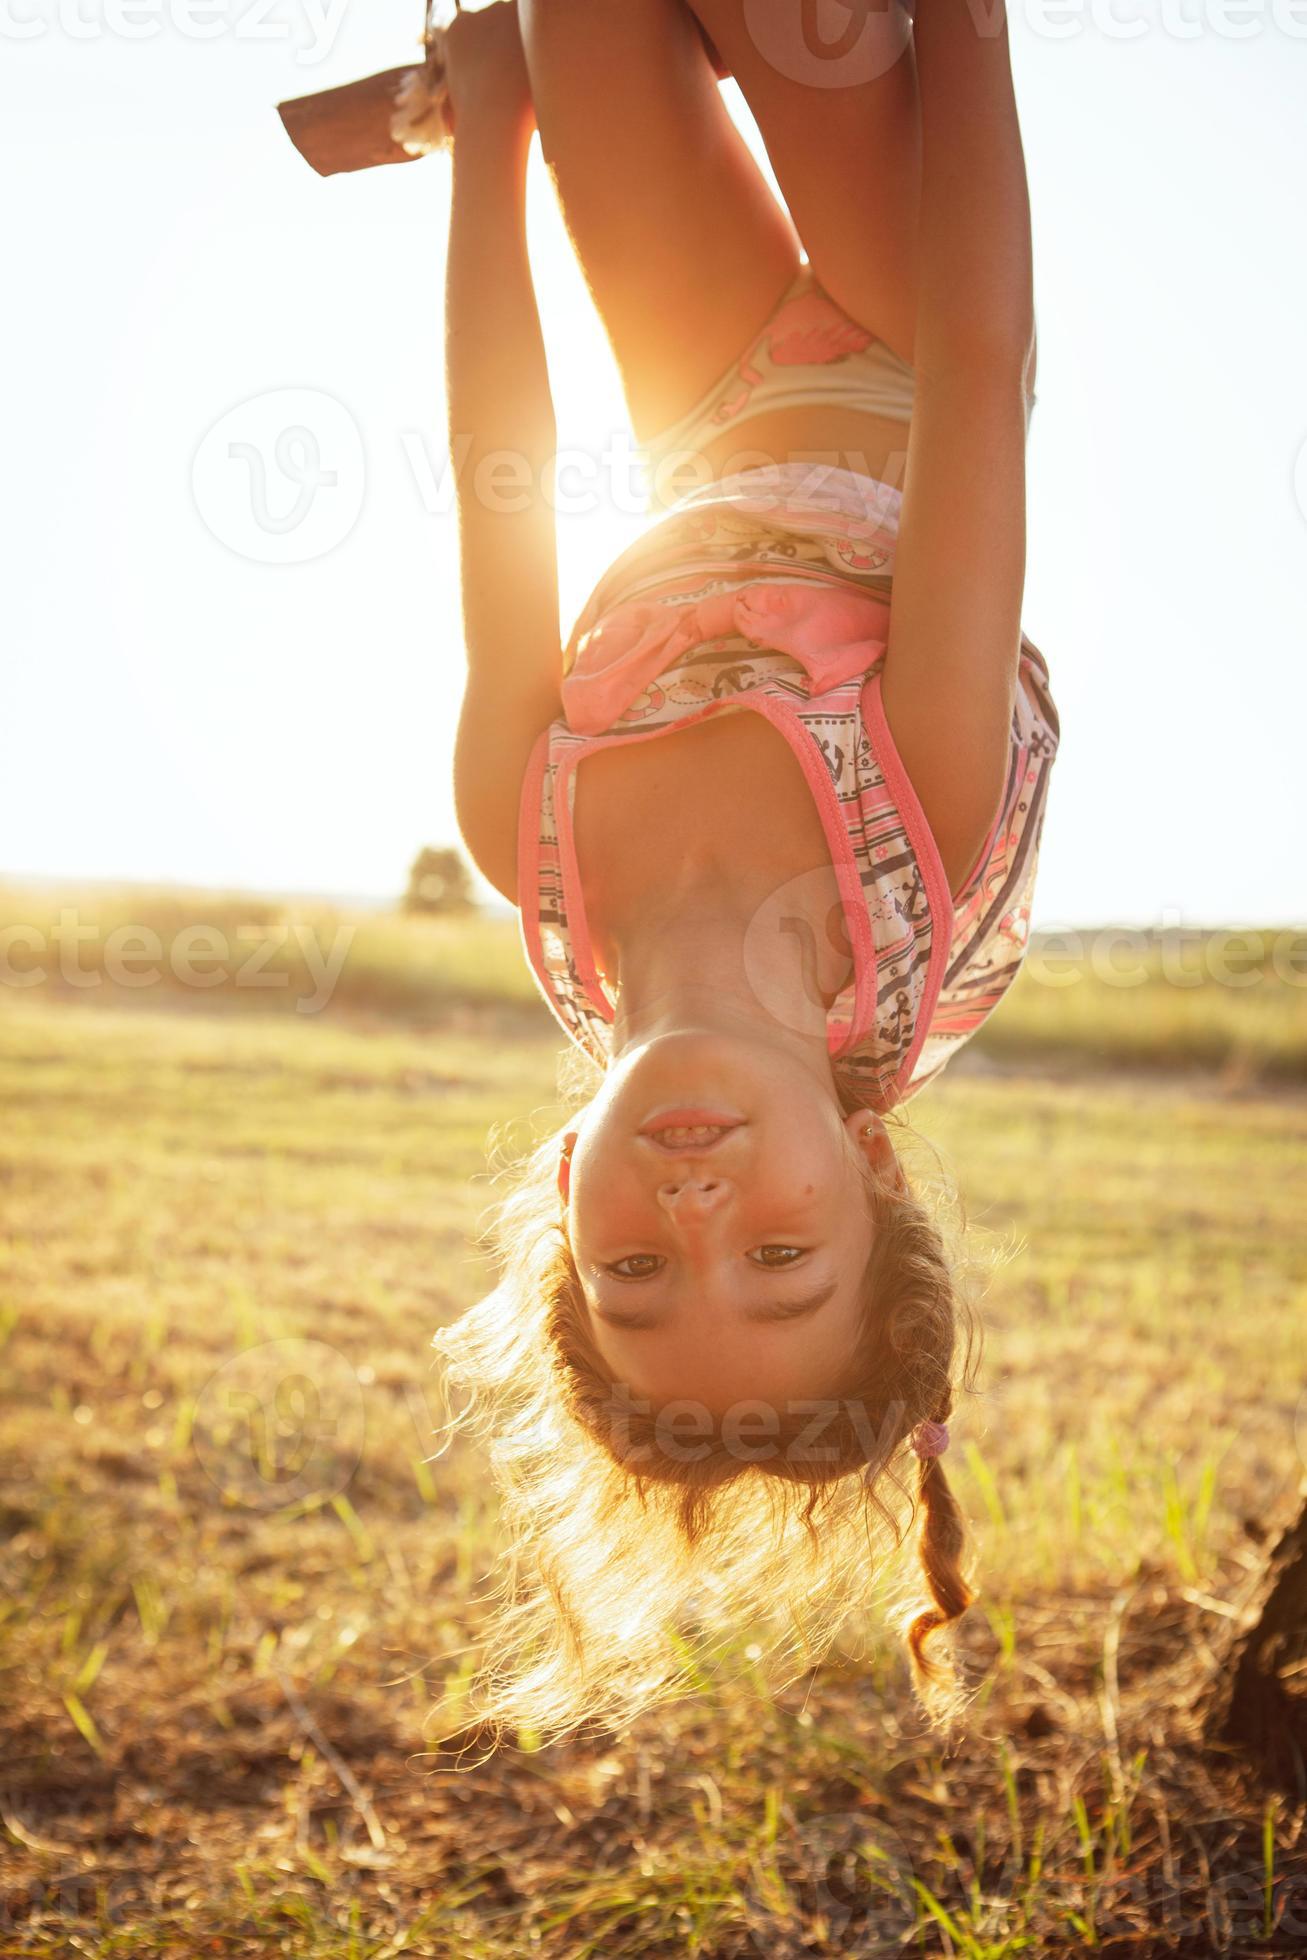 https://static.vecteezy.com/system/resources/previews/006/699/807/large_2x/the-girl-is-hanging-upside-down-on-a-tree-in-summer-in-orange-sunlight-and-a-light-dress-summer-time-heat-childhood-funny-portrait-with-disheveled-hair-photo.jpg